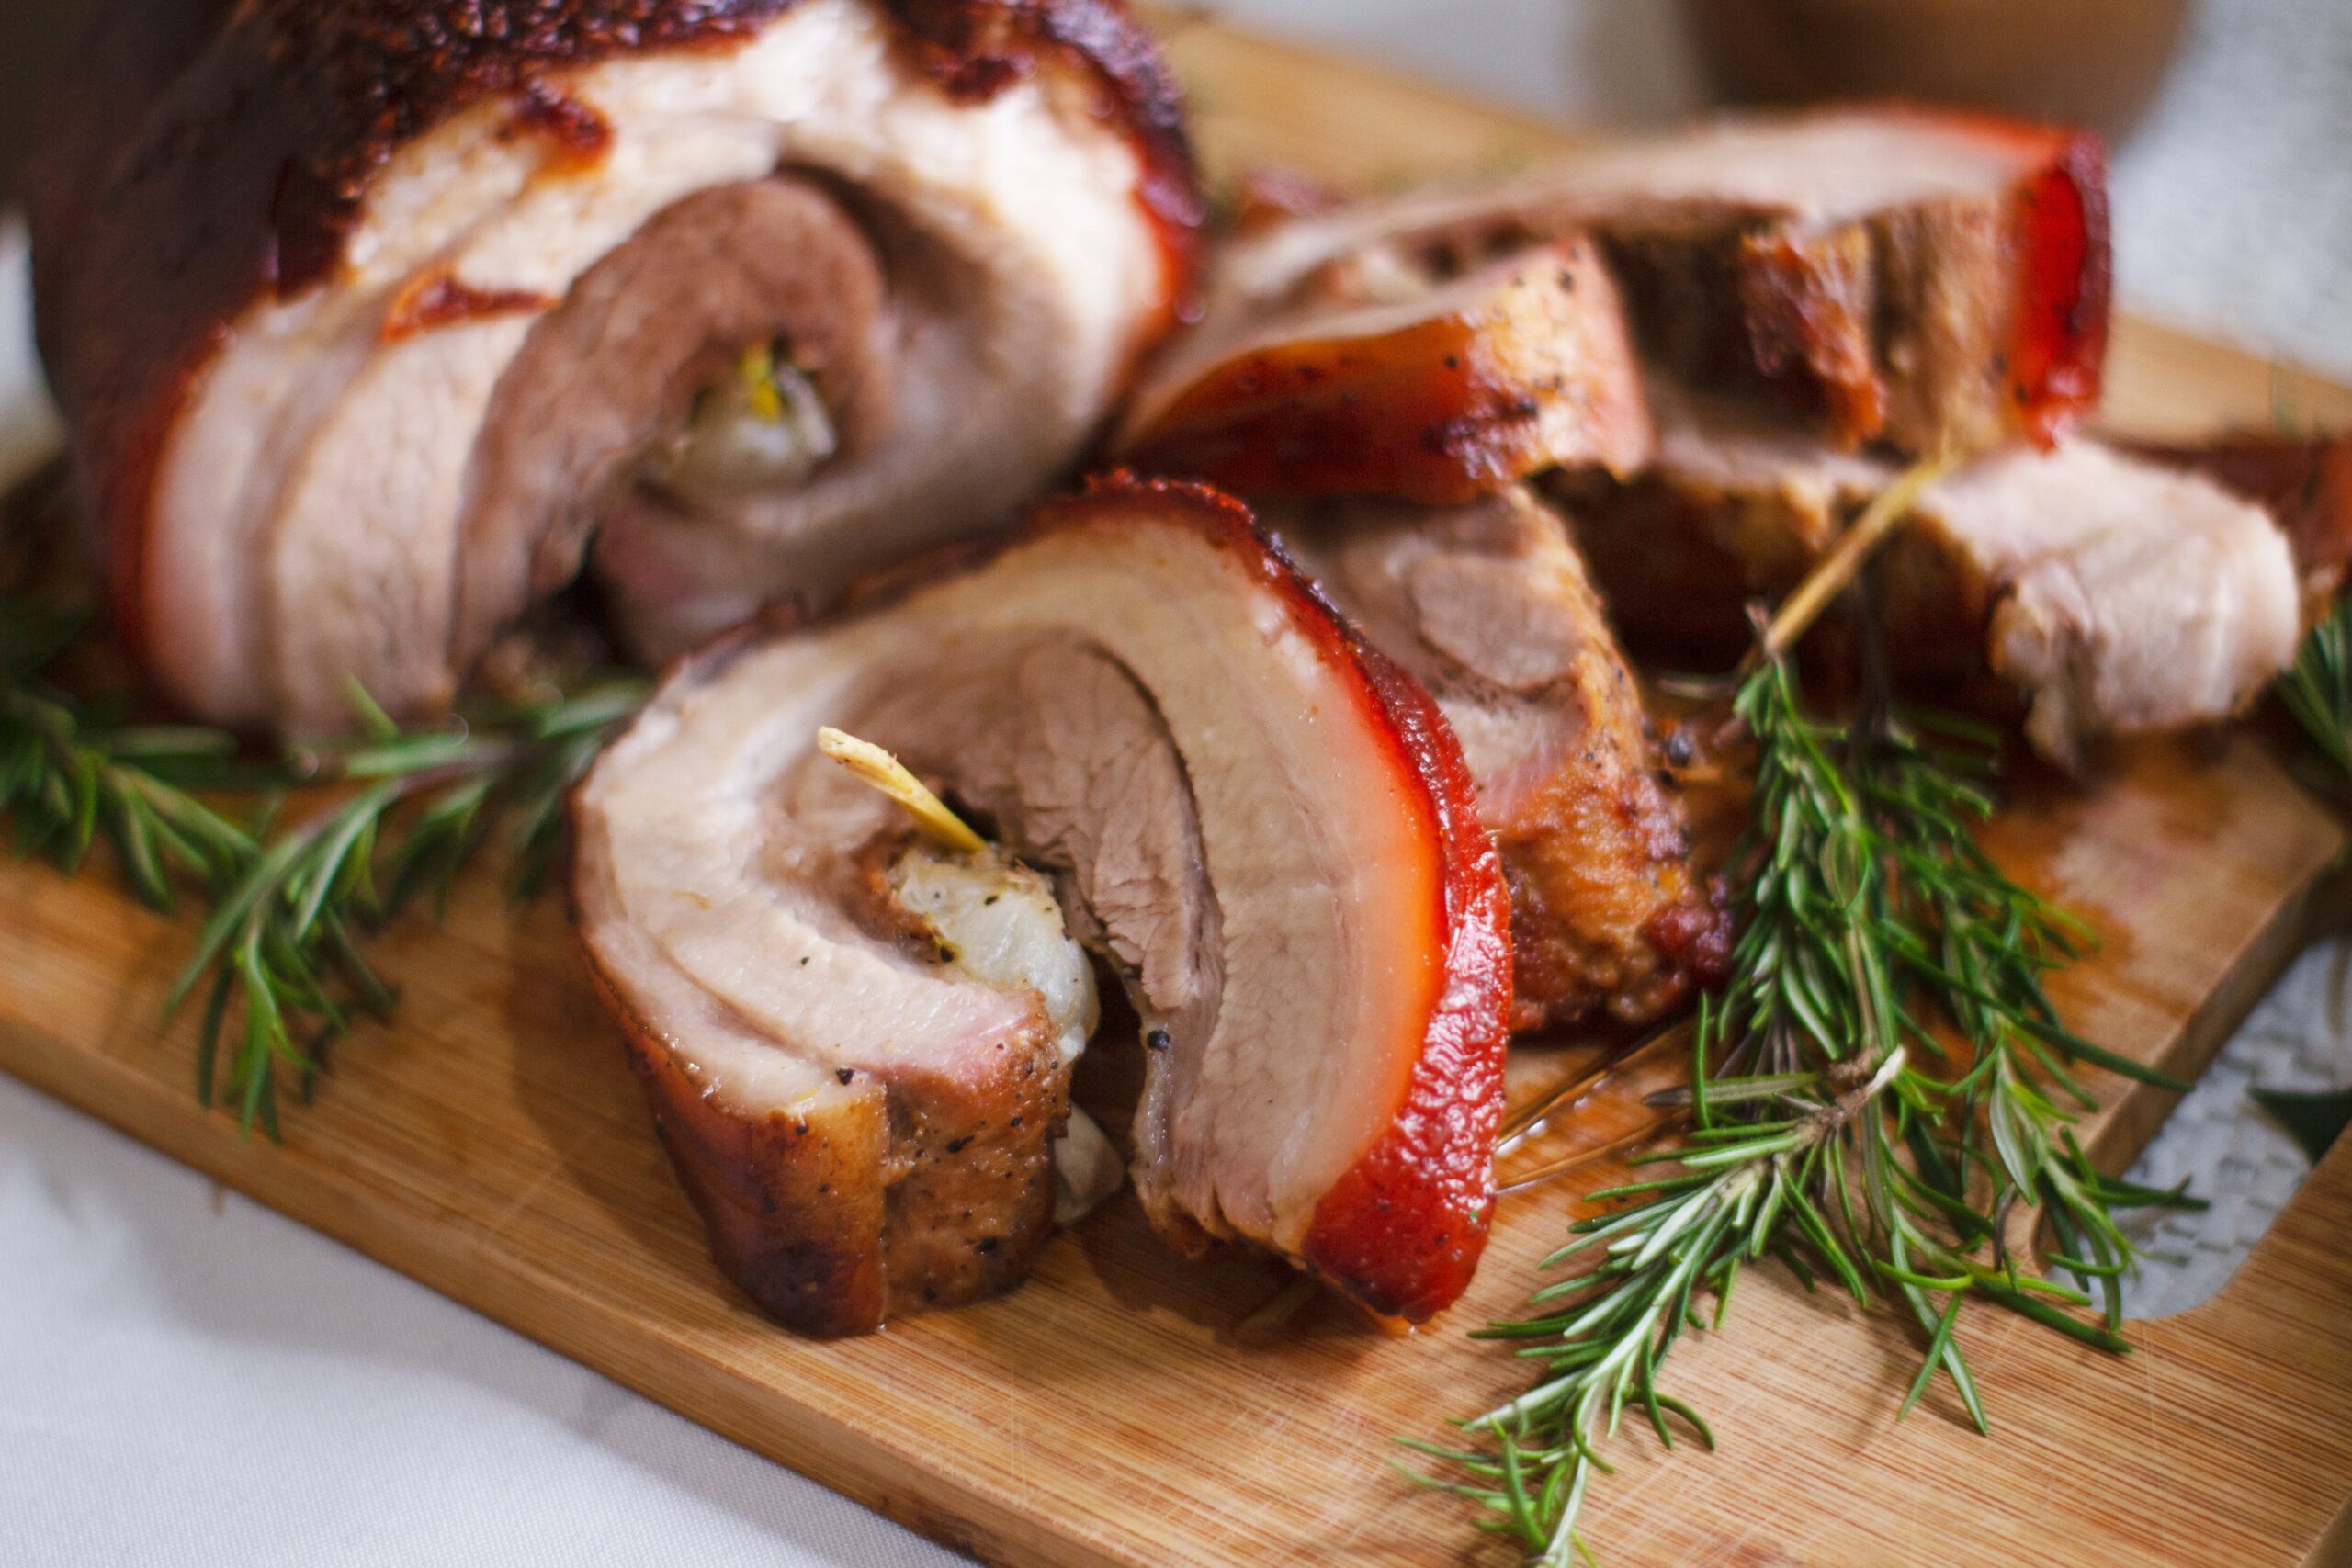 Porchetta will be served up by WindsorEats